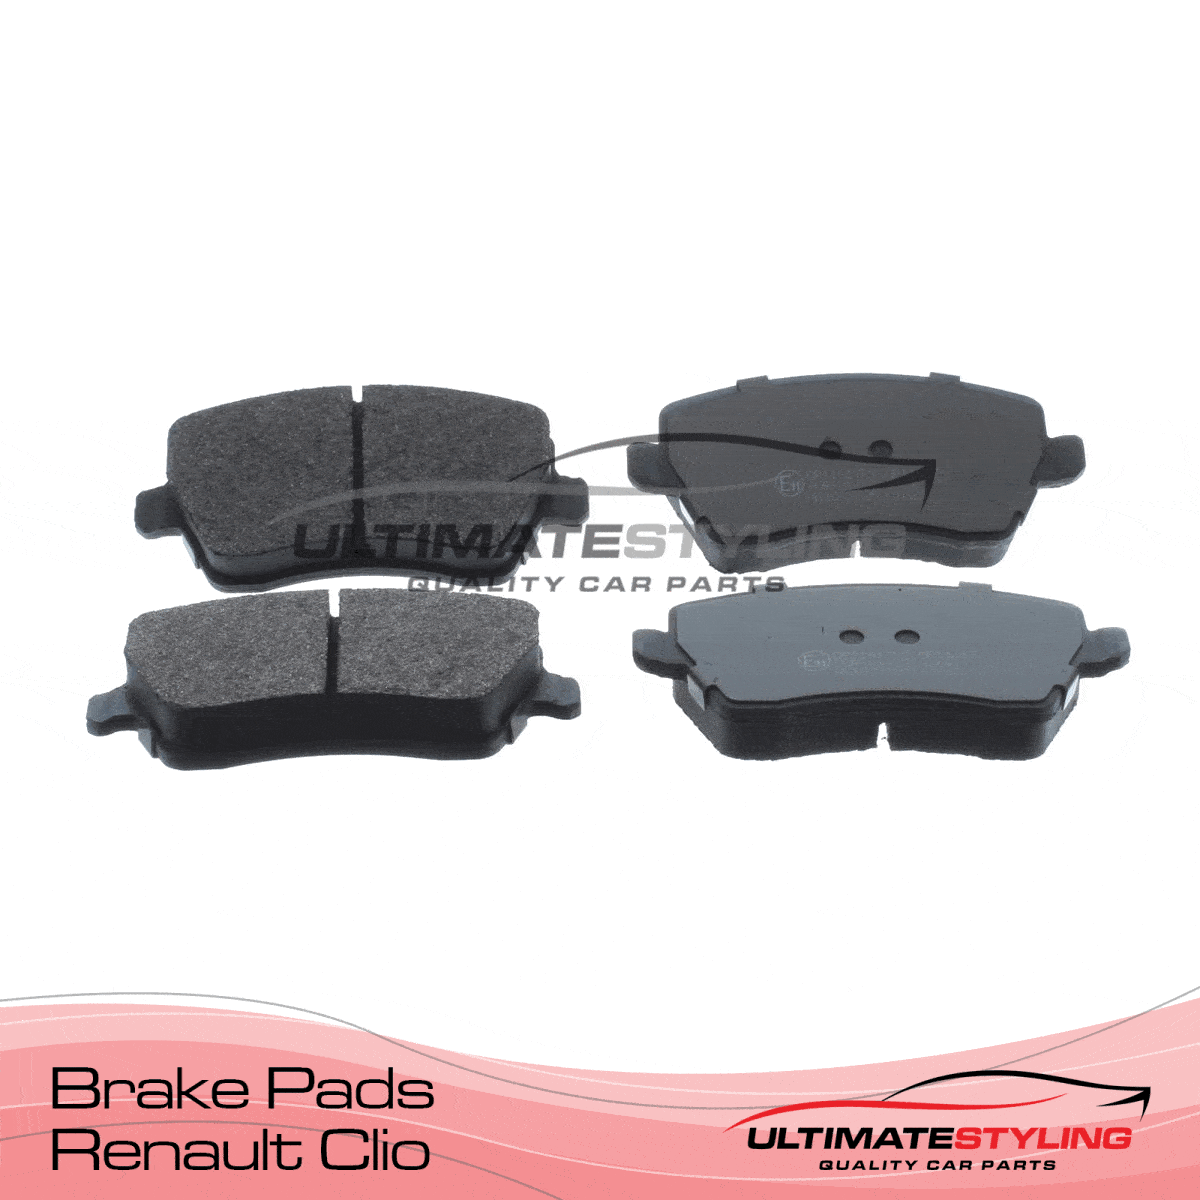 360 view of Renault Clio Brake Pads